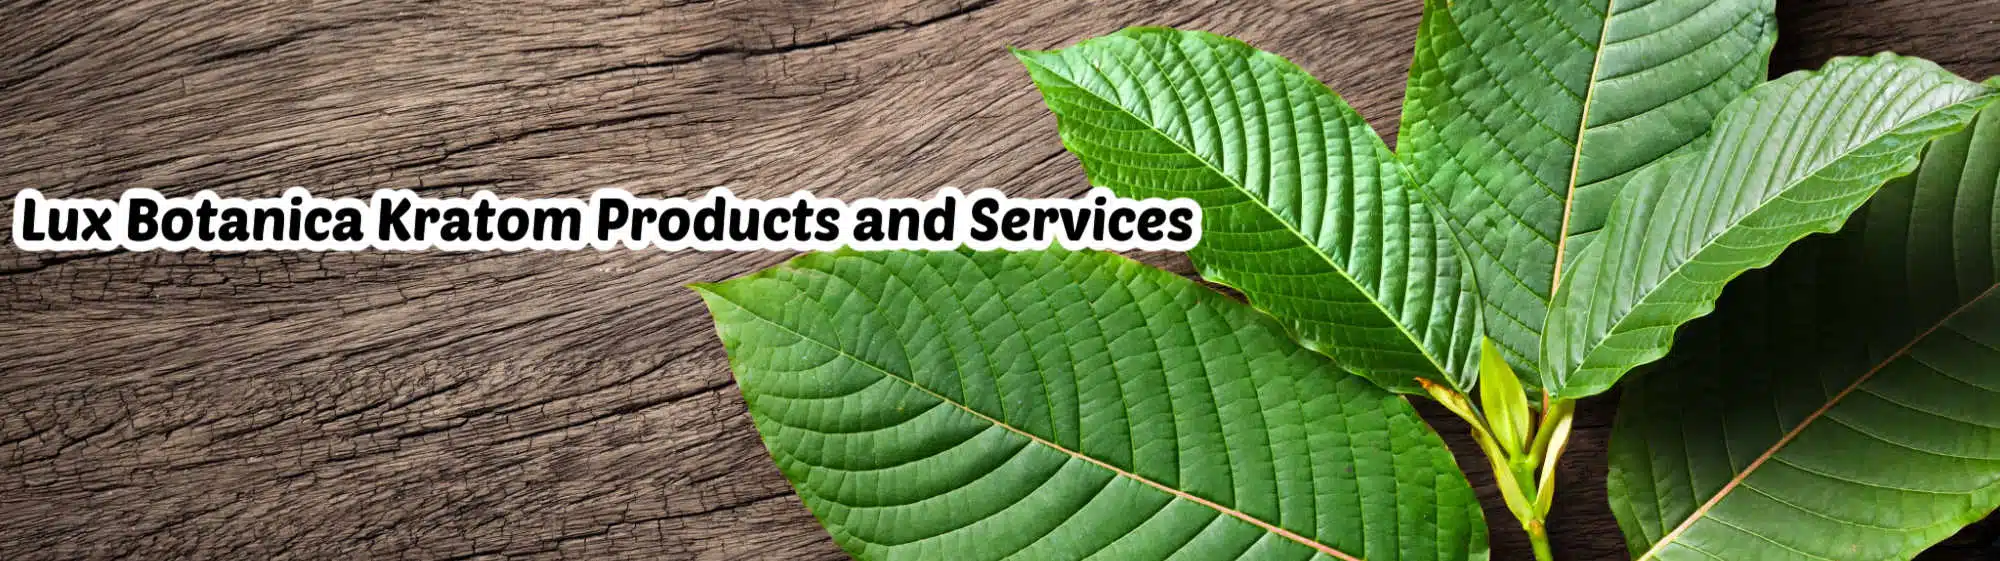 image of lux botanica kratom products and services